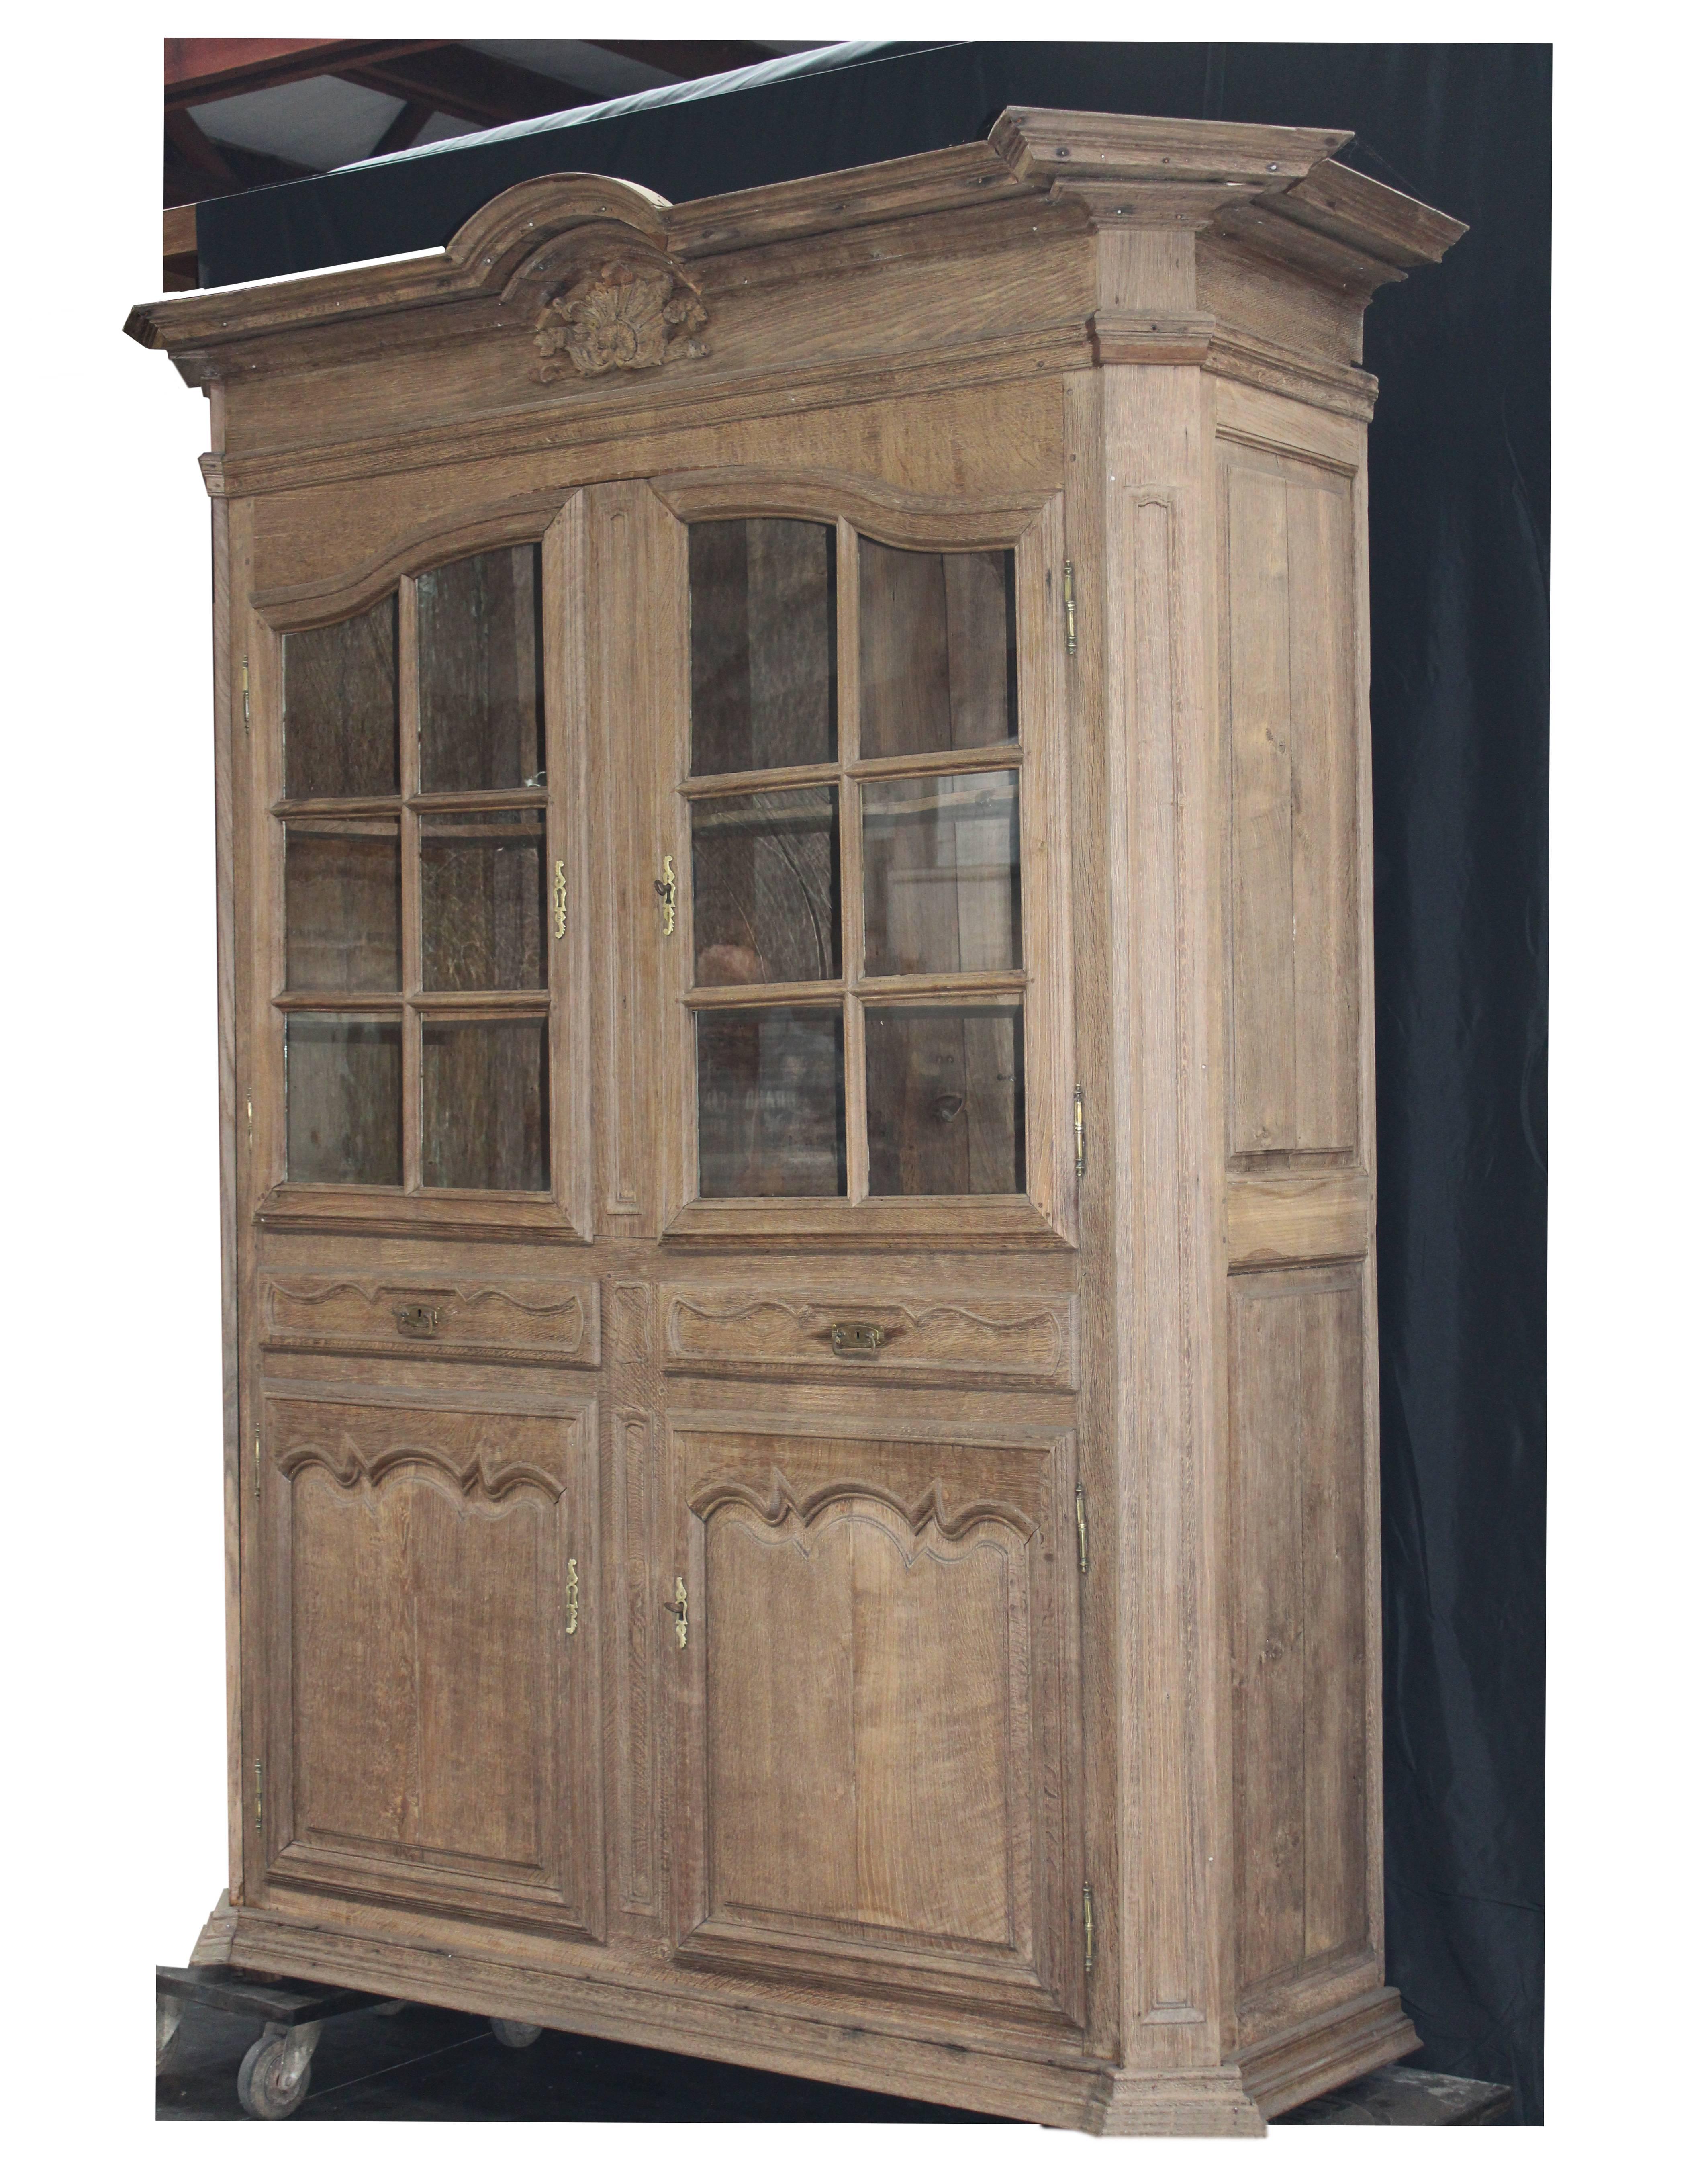 This is a Impressive tall glascabinet in bleached oak, Coms from a Beautiful Castle in Namur,
The cabinet is in a great condition, even with the original old handblown glass in the glasdoors
late 18th century 
nice exceptional quality piece